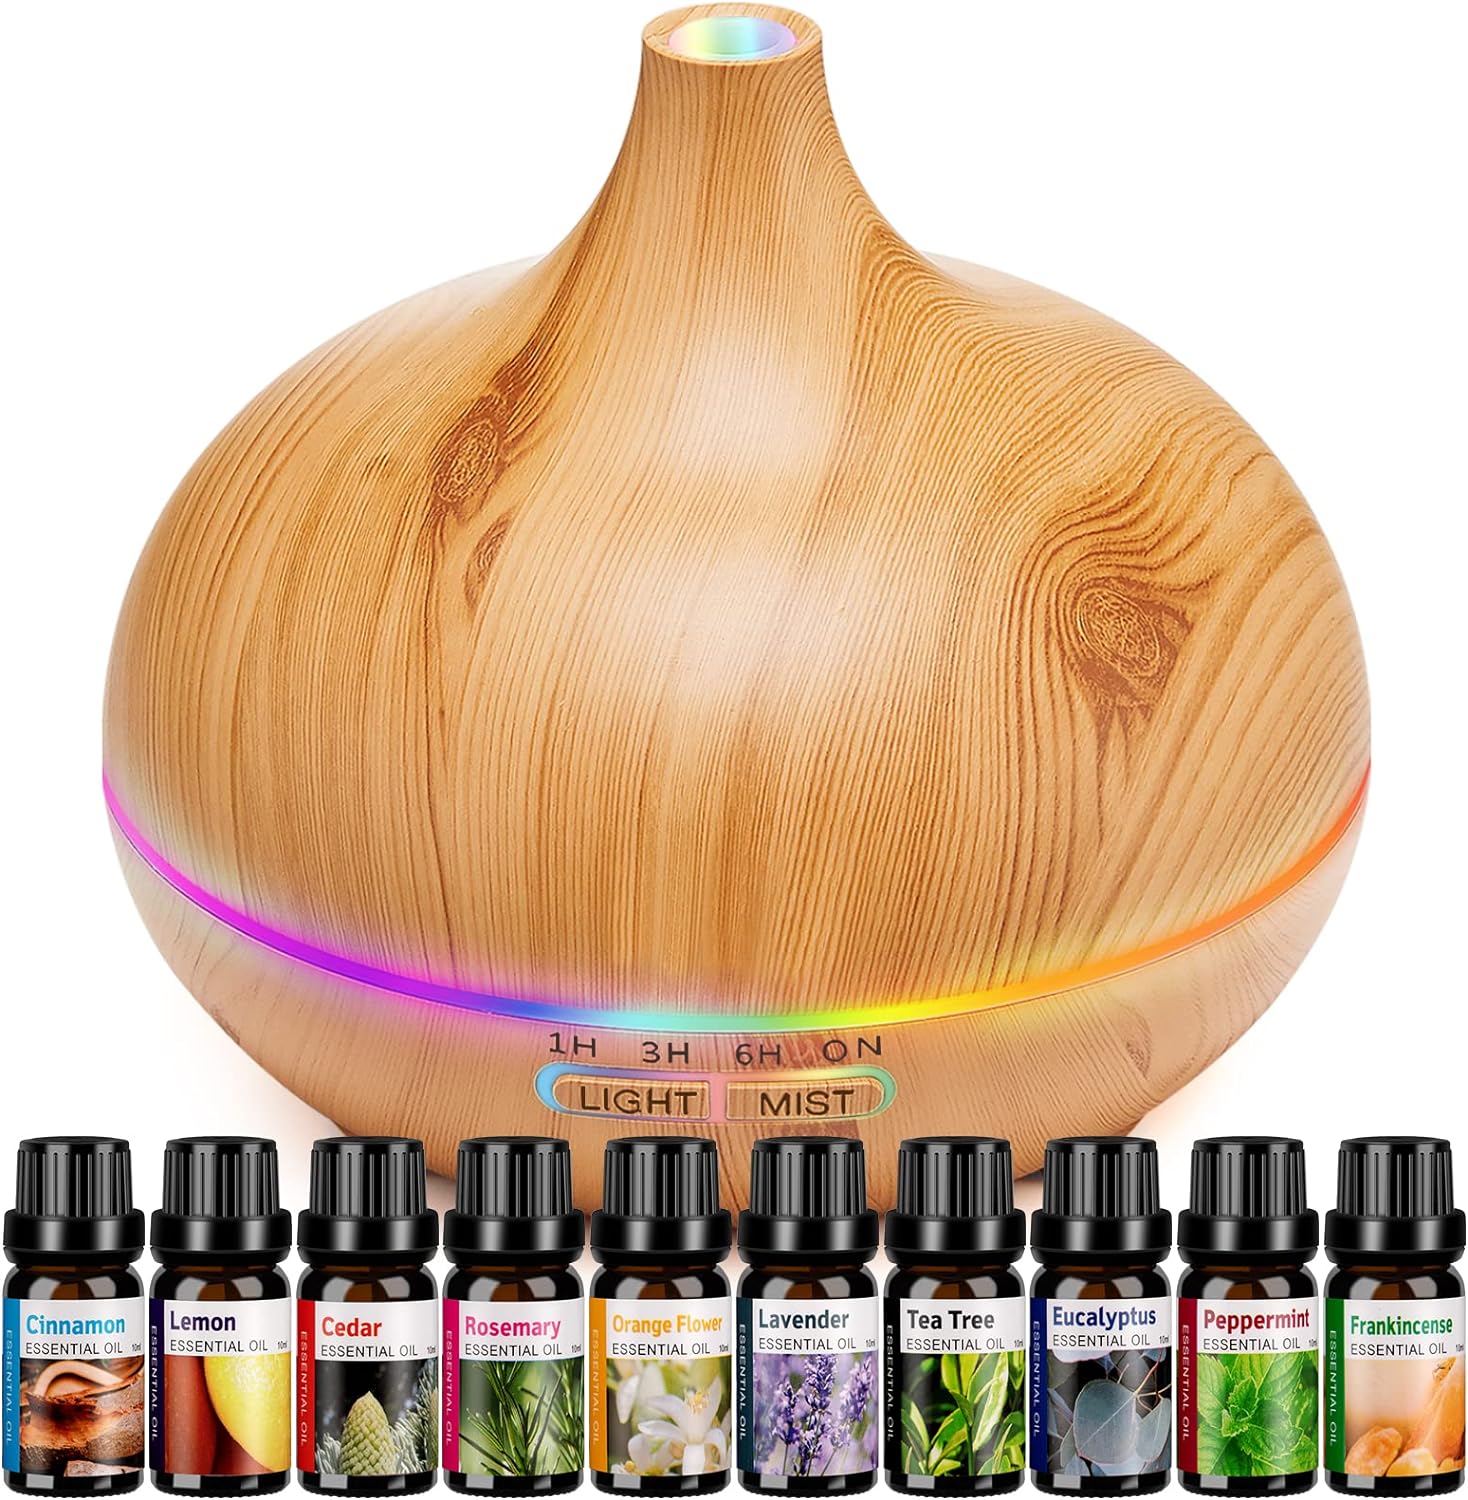 First, I ordered a set of aroma scents and tried a candle-operated diffuser which was ineffective. After reading the reviews for this diffuser, I ordered it and the difference was incredible. Put it in my living room. Easy to set up, quiet, and smells wonderful. I immediately ordered a second one for the bedroom. This is a winner!